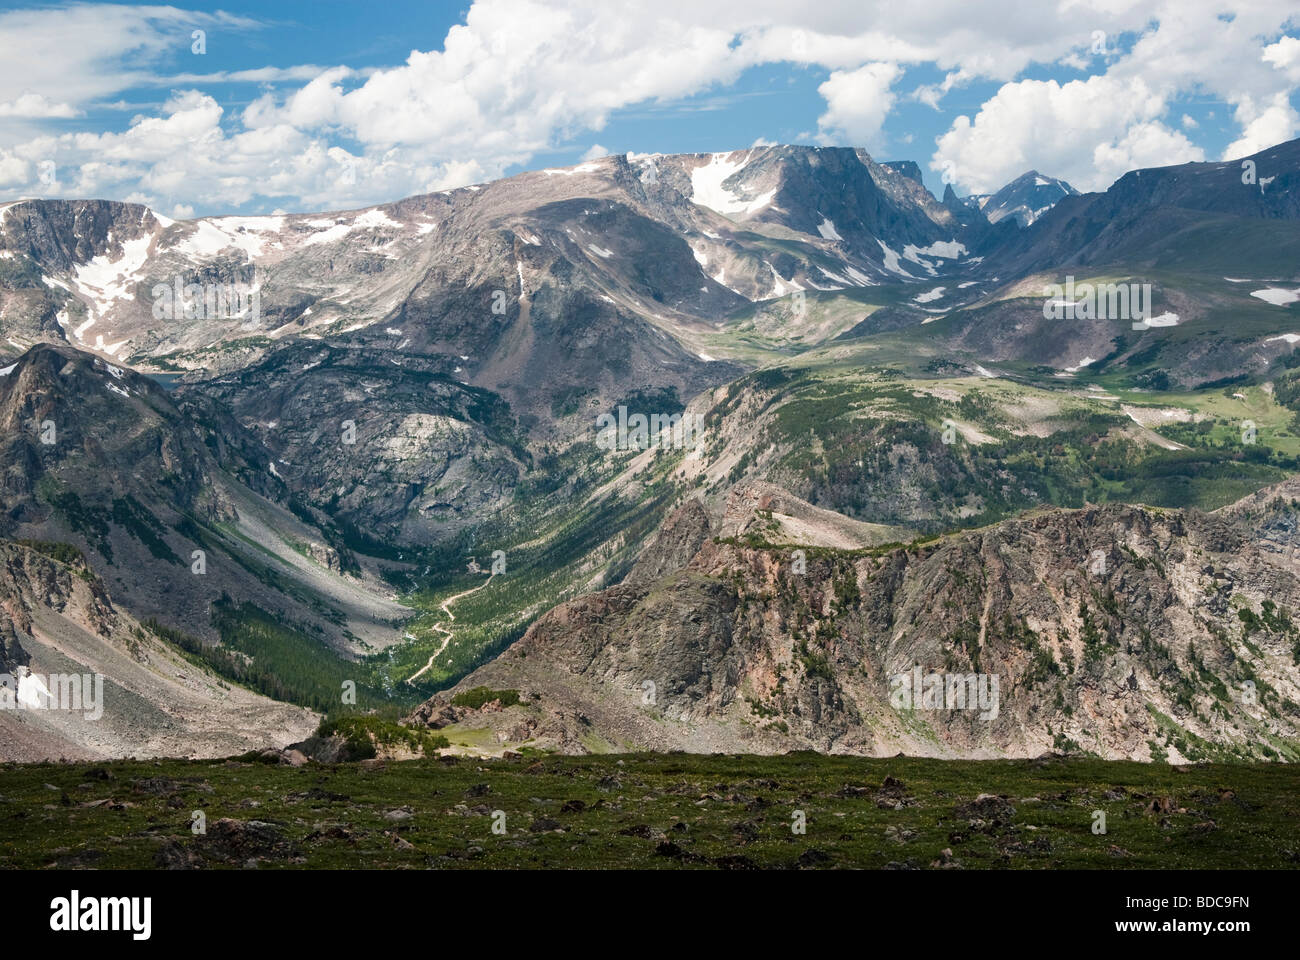 View of the mountains and valleys from the Beartooth Highway Stock Photo